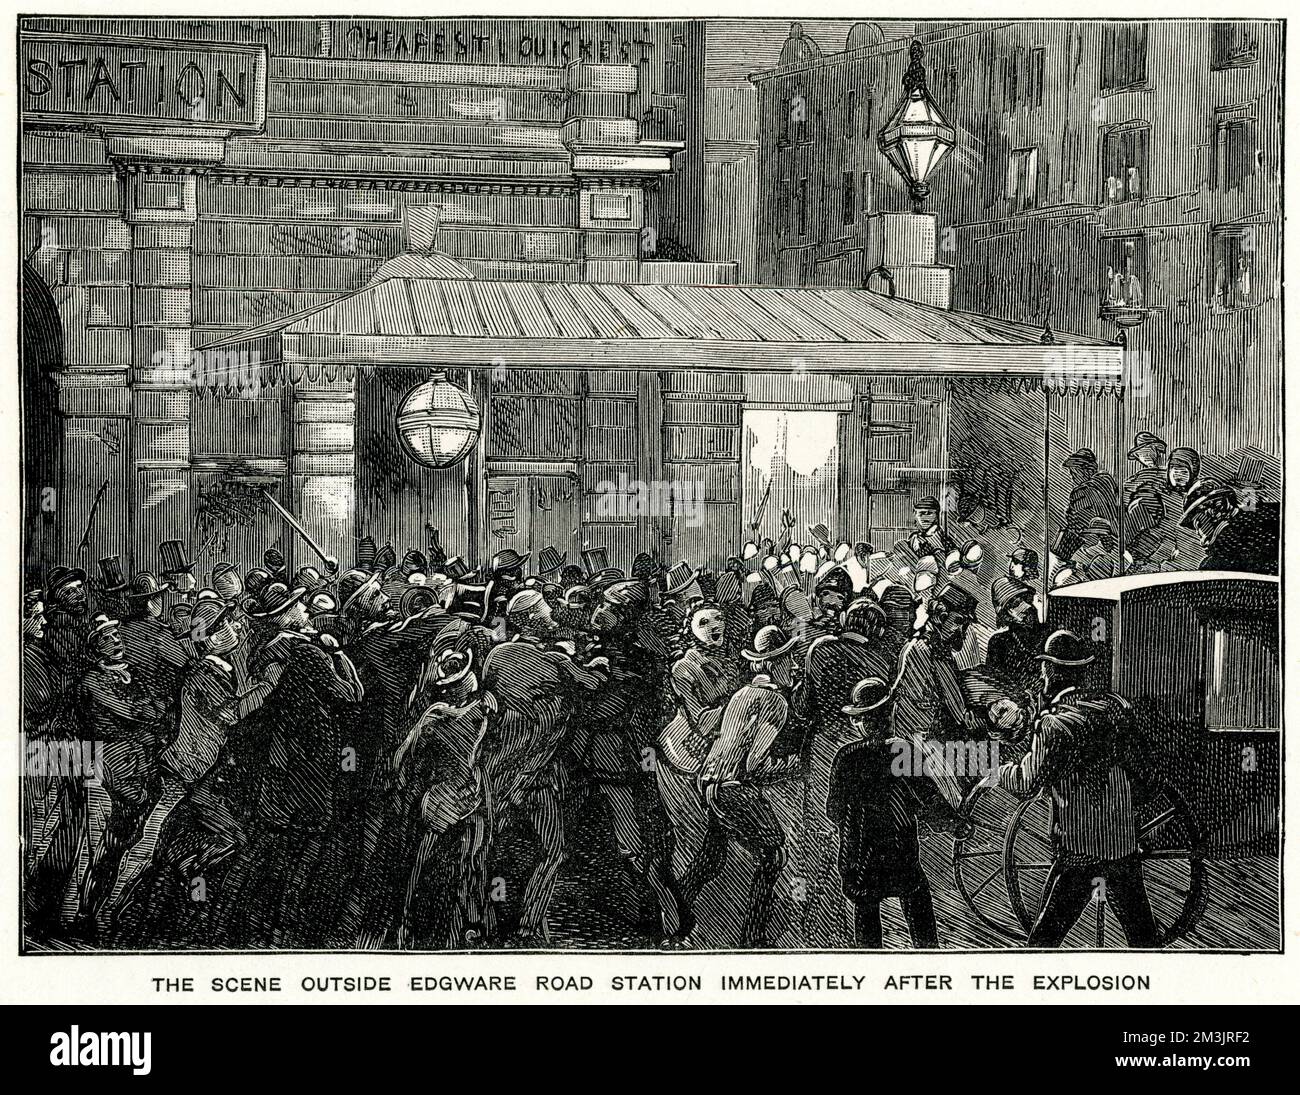 People running in panic from Edgware Road Station moments after an explosion on the underground service on 30 October 1883. Two explosions took place, one on a train near Paddington (Praed Street) and another in a tunnel between Charing Cross and Westminster. The wounded were taken to St Mary's Hospital, Paddington, to be treated.     Date: 1883 Stock Photo